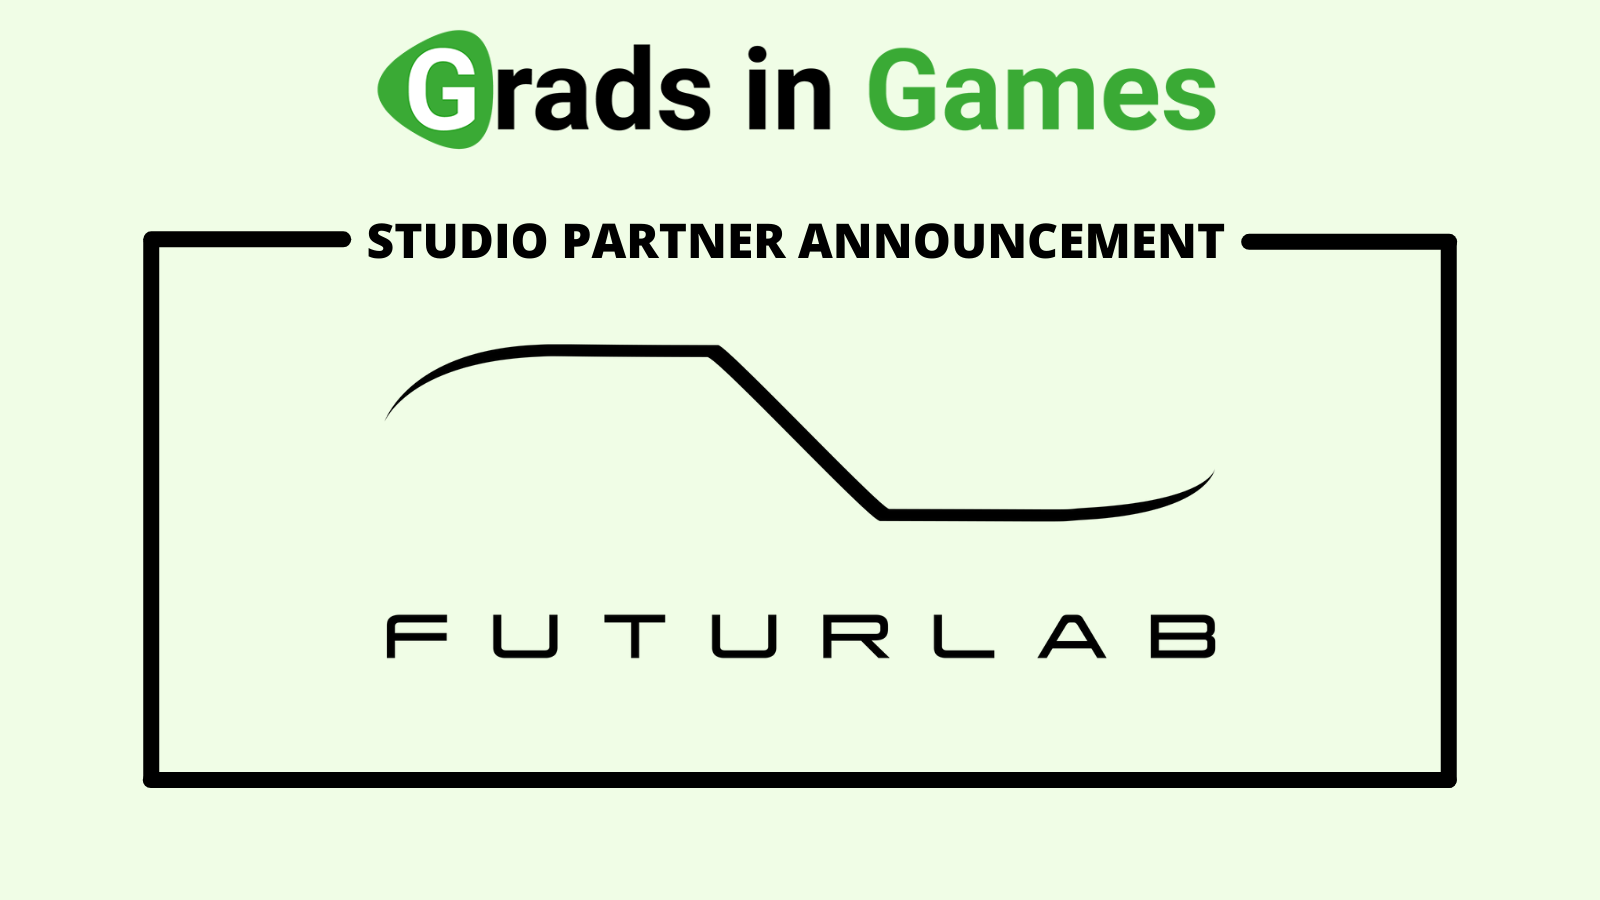 FuturLab joins as a Grads in Games Partner Studio for 2021/22